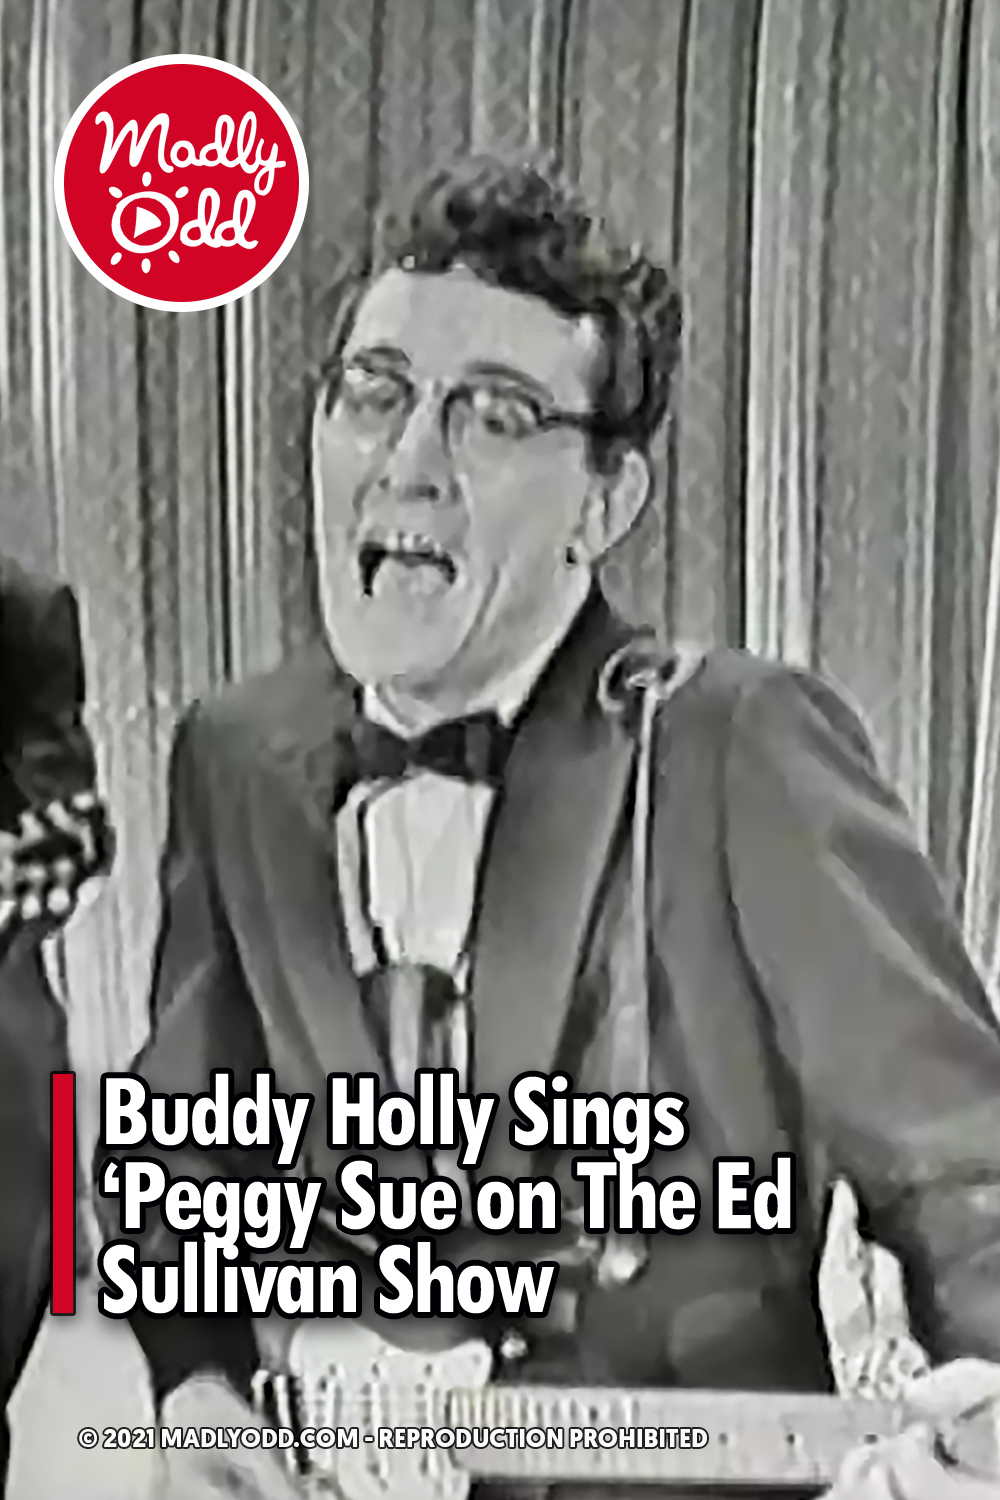 Buddy Holly Sings ‘Peggy Sue on The Ed Sullivan Show